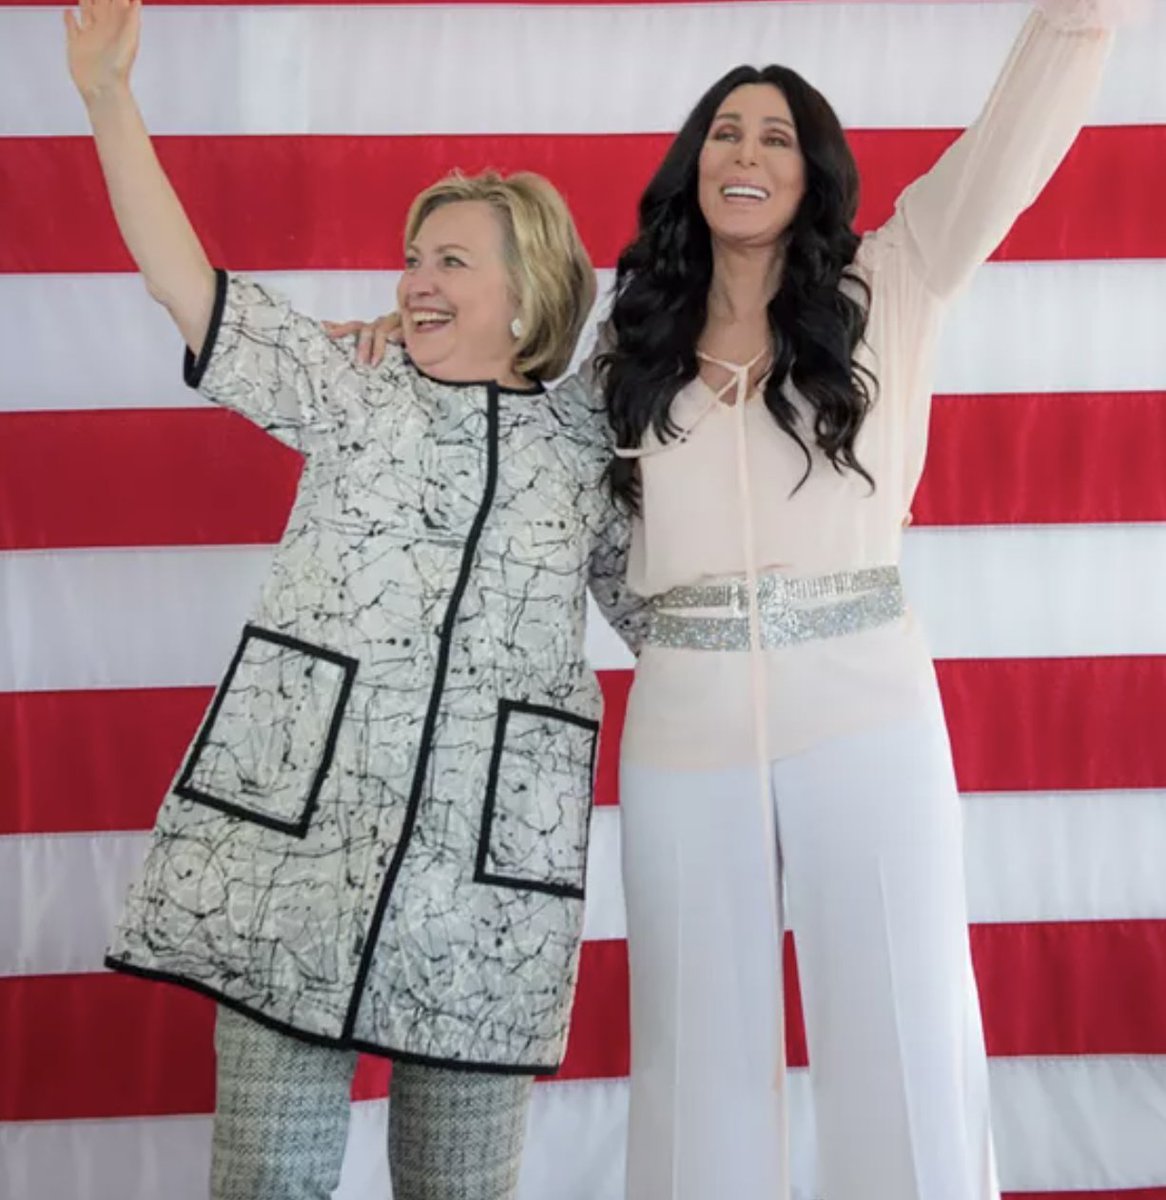 @CripesSuzette She wore this giant potholder suit and STOOD NEXT TO CHER.